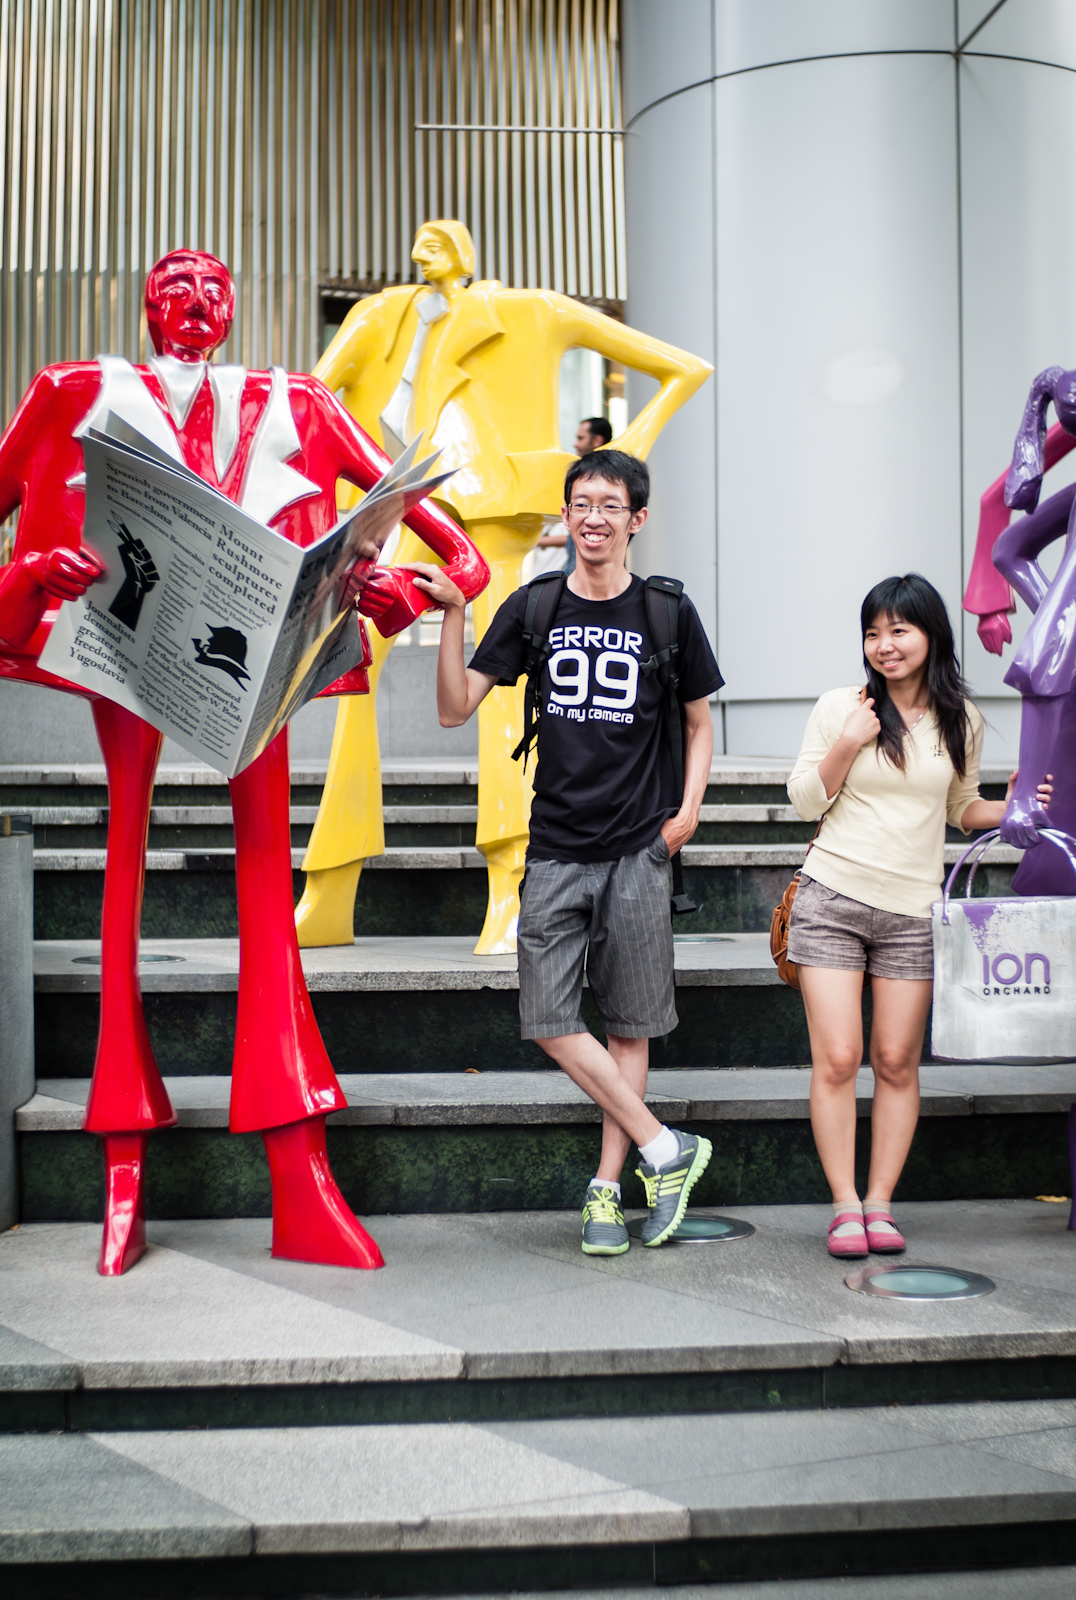 Tourists in front of ION Orchard